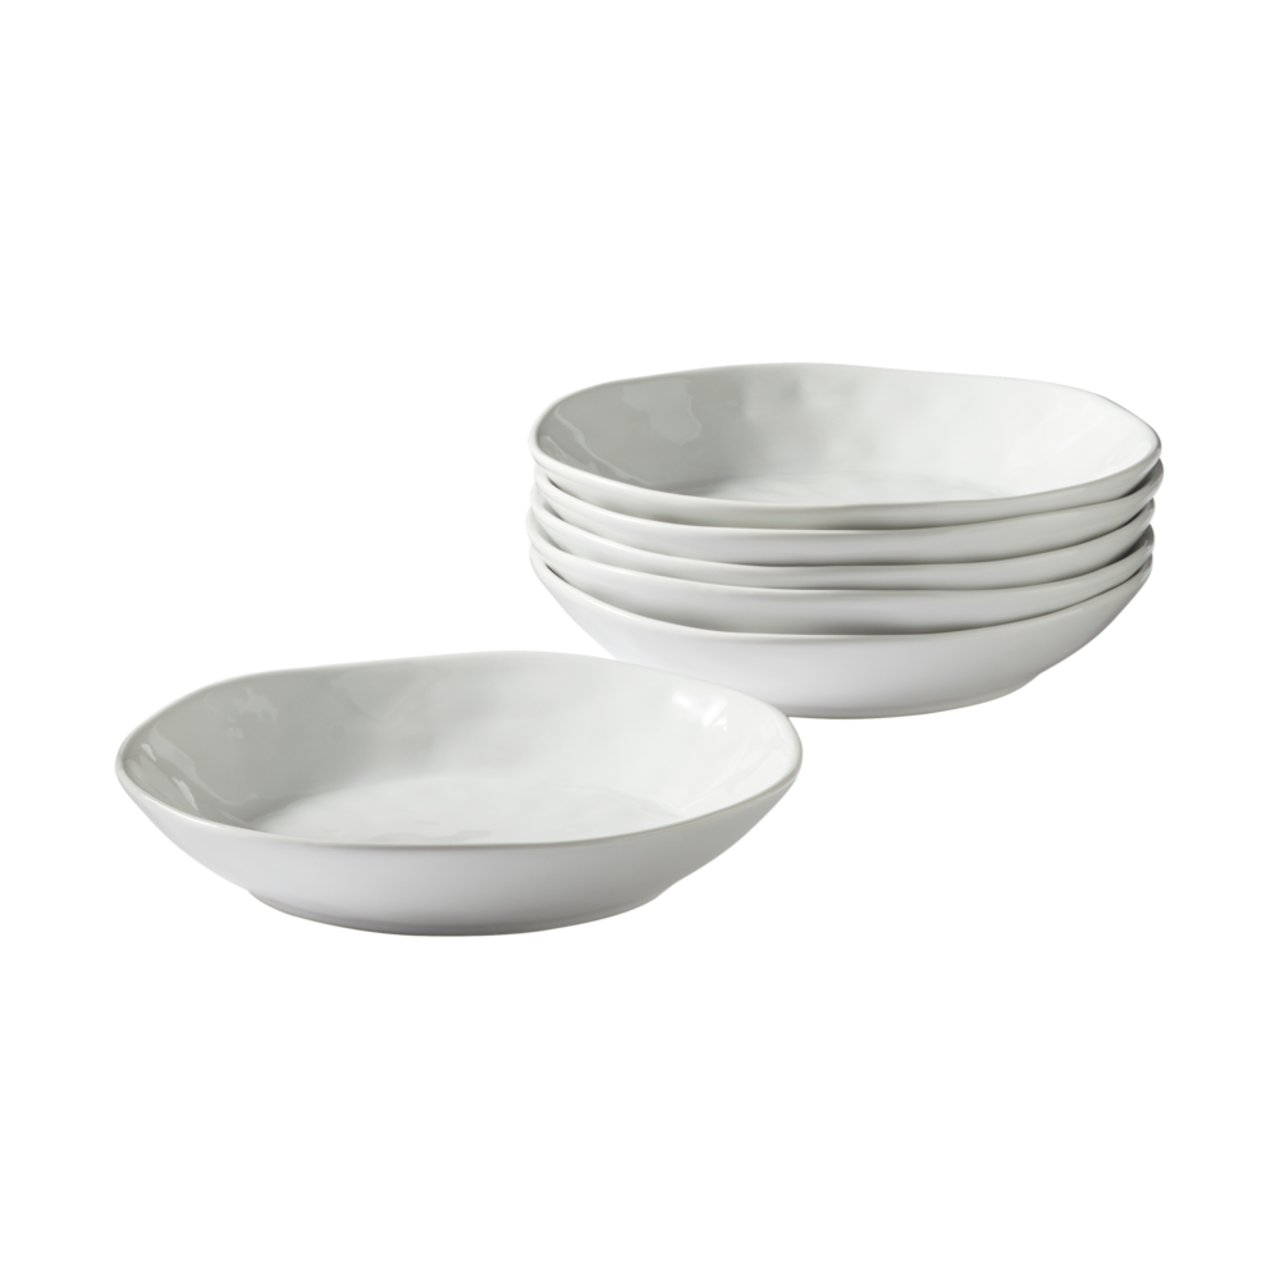 https://media-www.canadiantire.ca/product/living/kitchen/dining-and-entertaining/1429845/paderno-sandbank-organic-dinner-bowl-set-71981534-1c41-45fe-bfae-ef0ef64f4dee.png?imdensity=1&imwidth=640&impolicy=mZoom